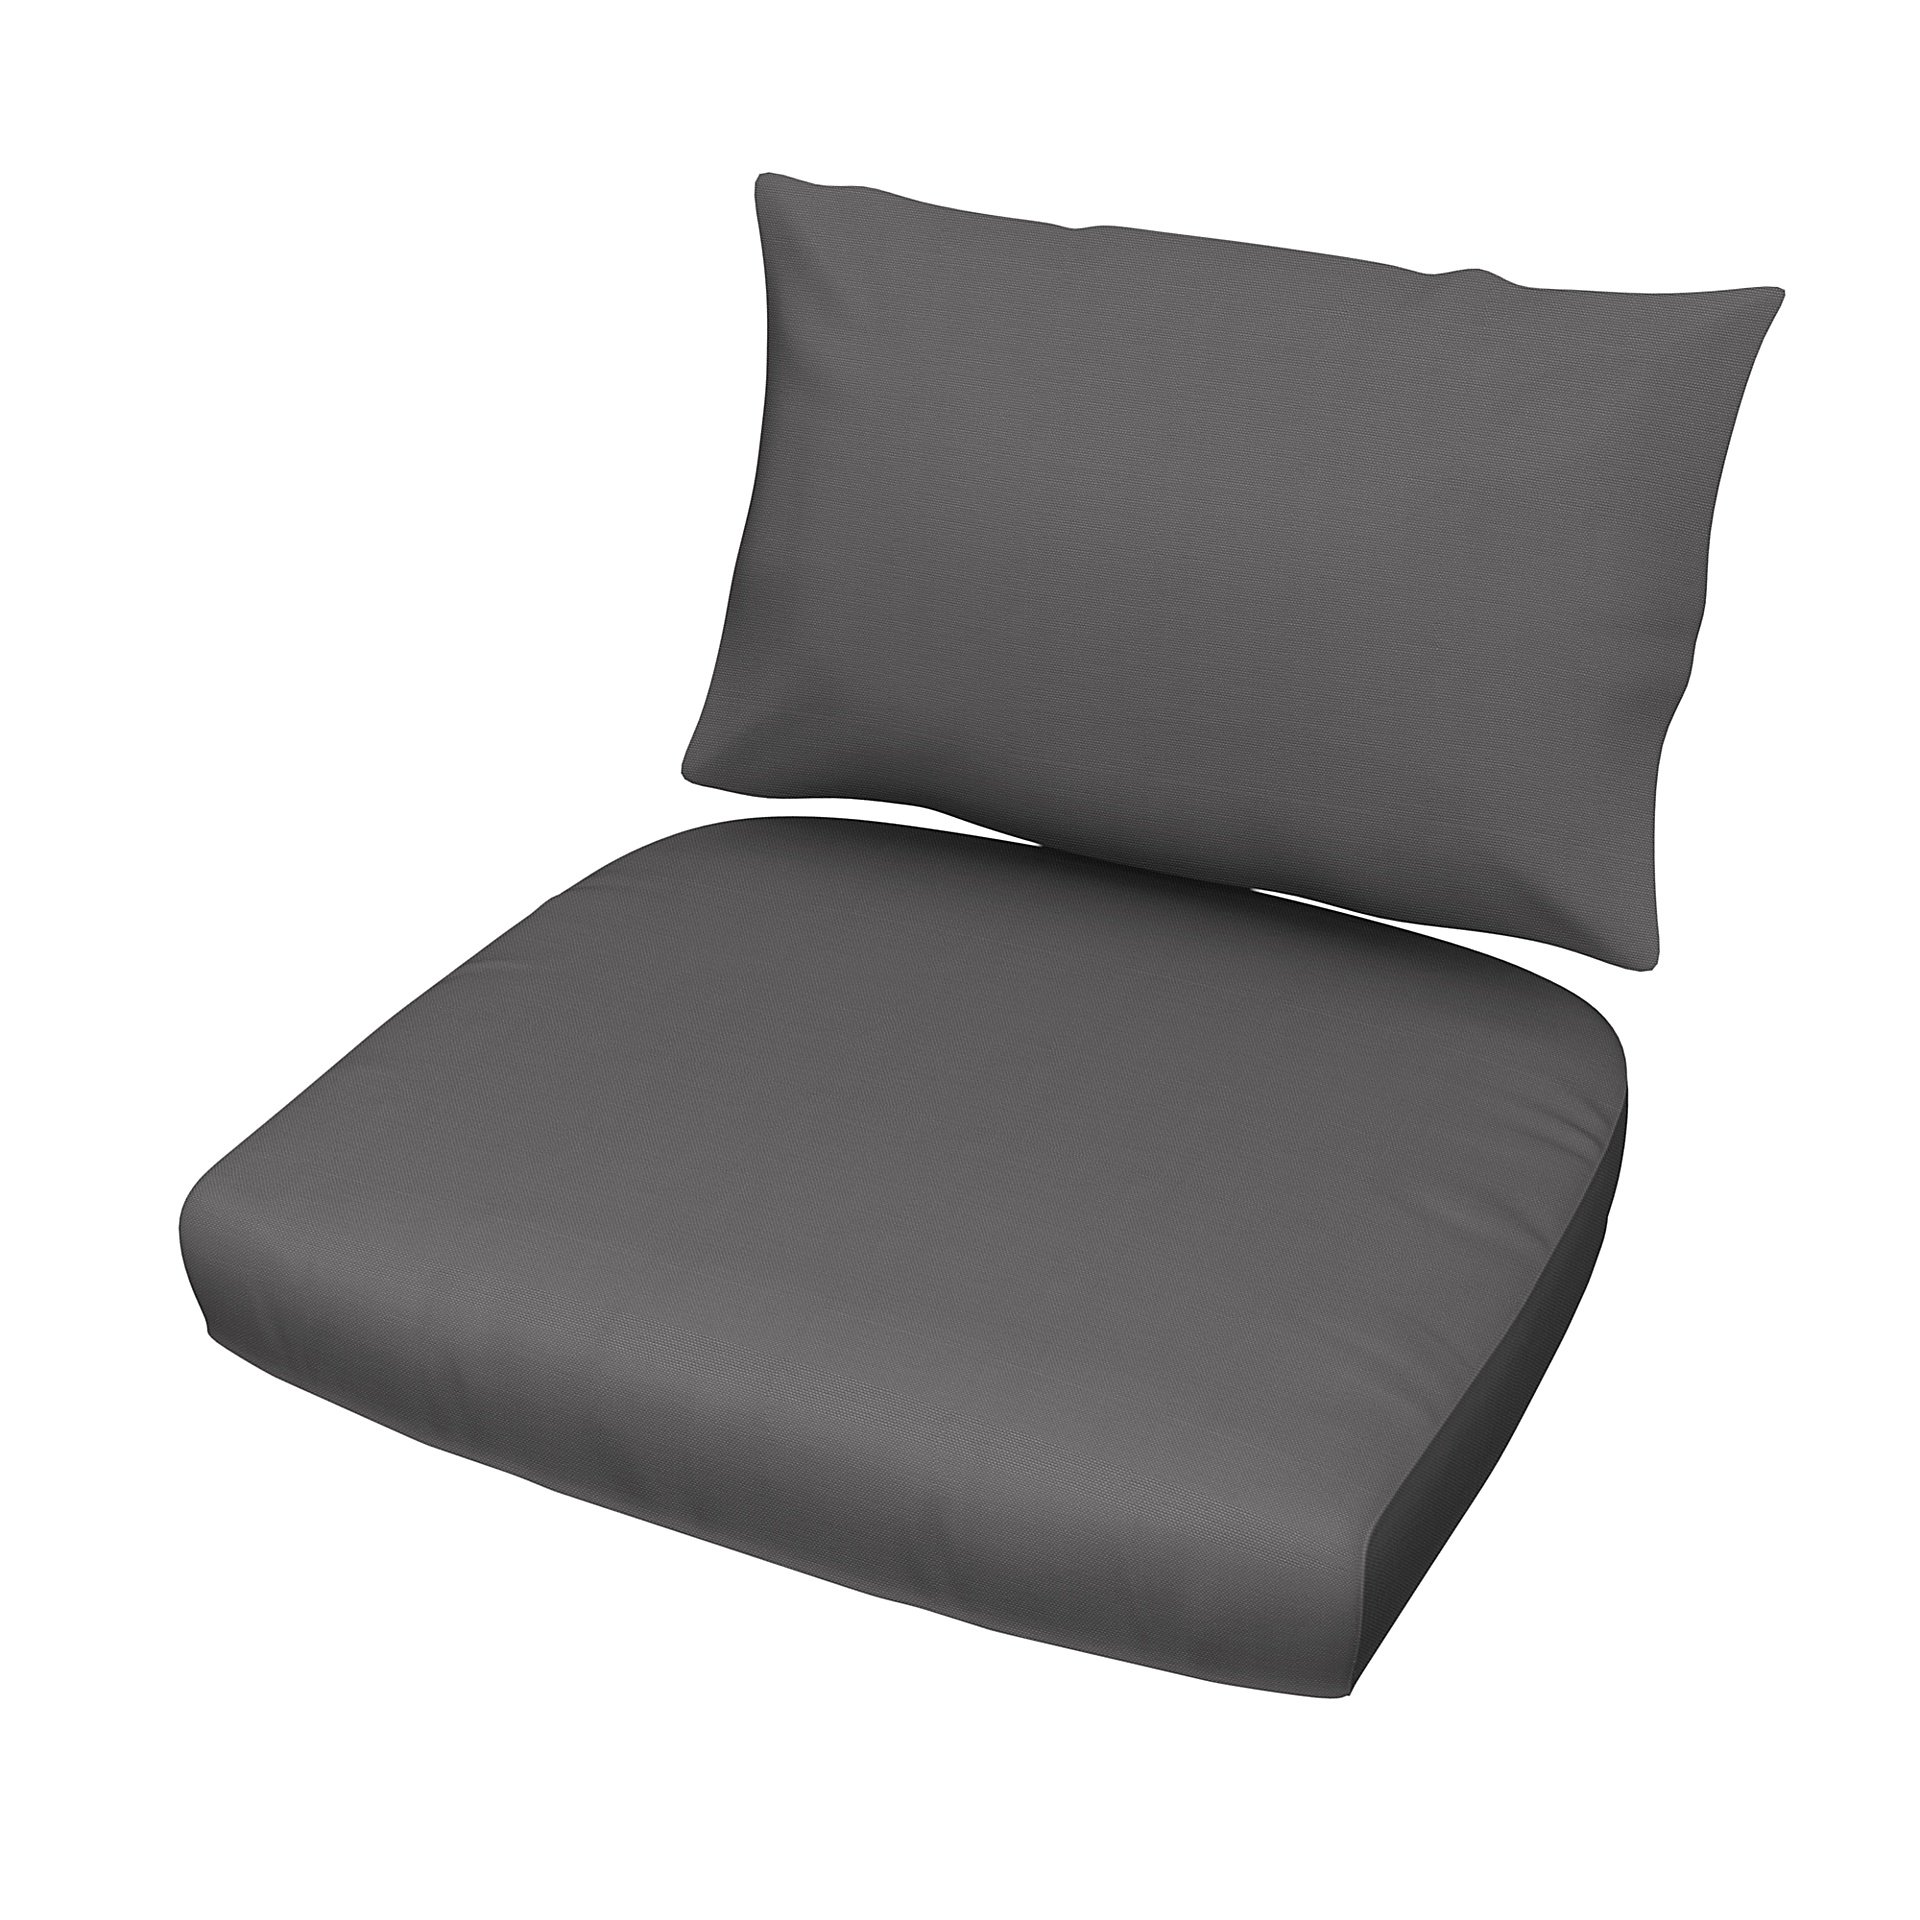 IKEA - Stockholm Rattan Chair Cushion Cover Set, Smoked Pearl, Cotton - Bemz